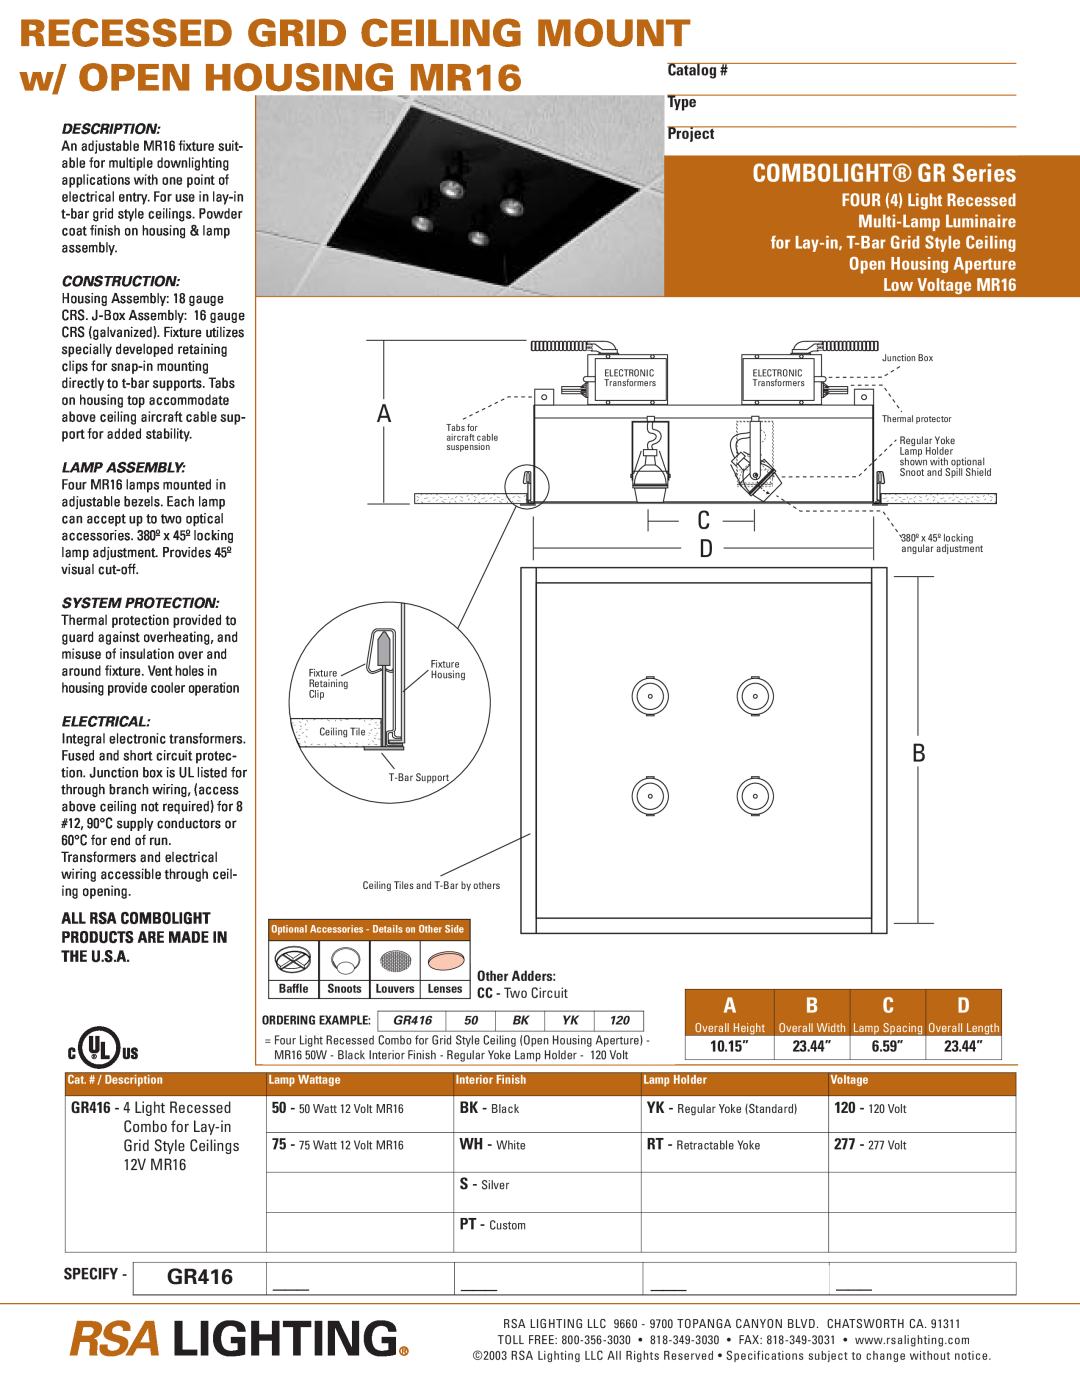 Cooper Lighting GR416 specifications Recessed Grid Ceiling Mount, w/ OPEN HOUSING MR16, COMBOLIGHT GR Series, Catalog # 